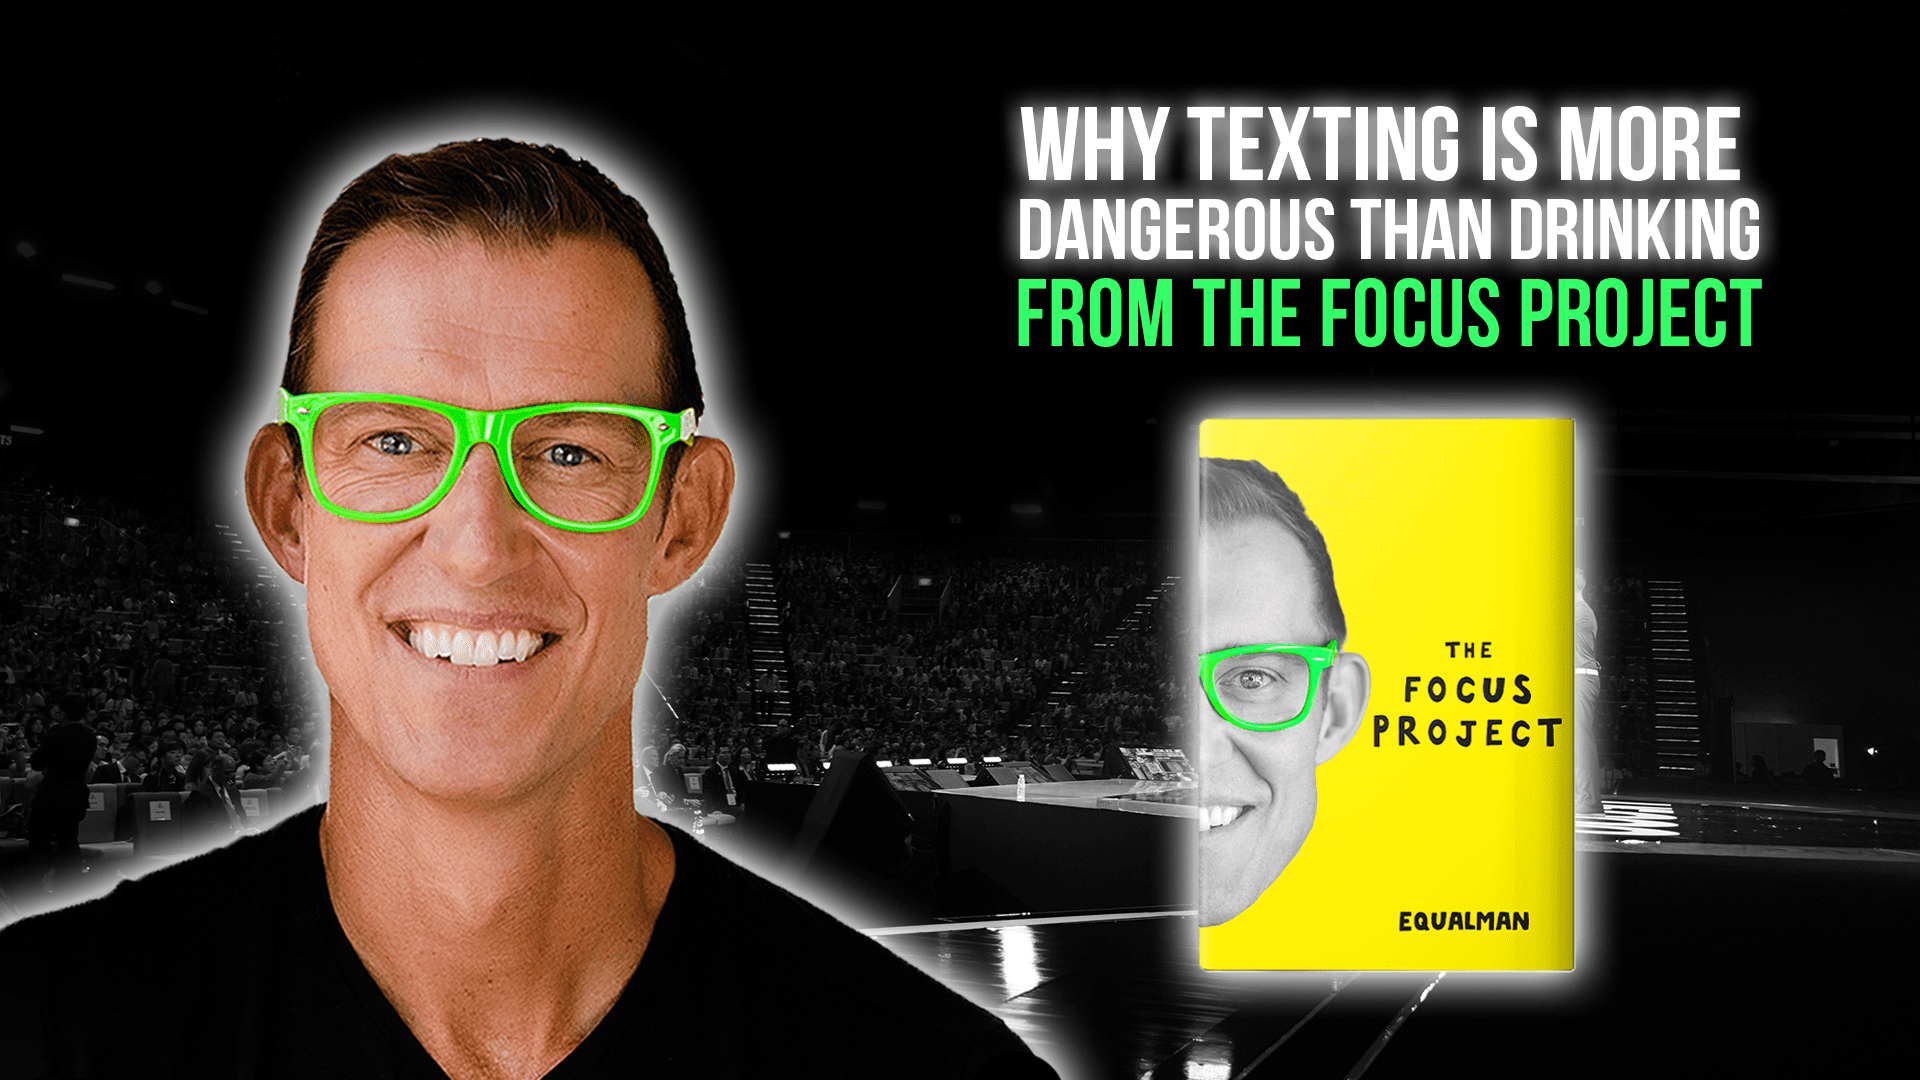 super-u-podcast-why-texting-is-more-dangerous-than-drinking-the-focus-project-30